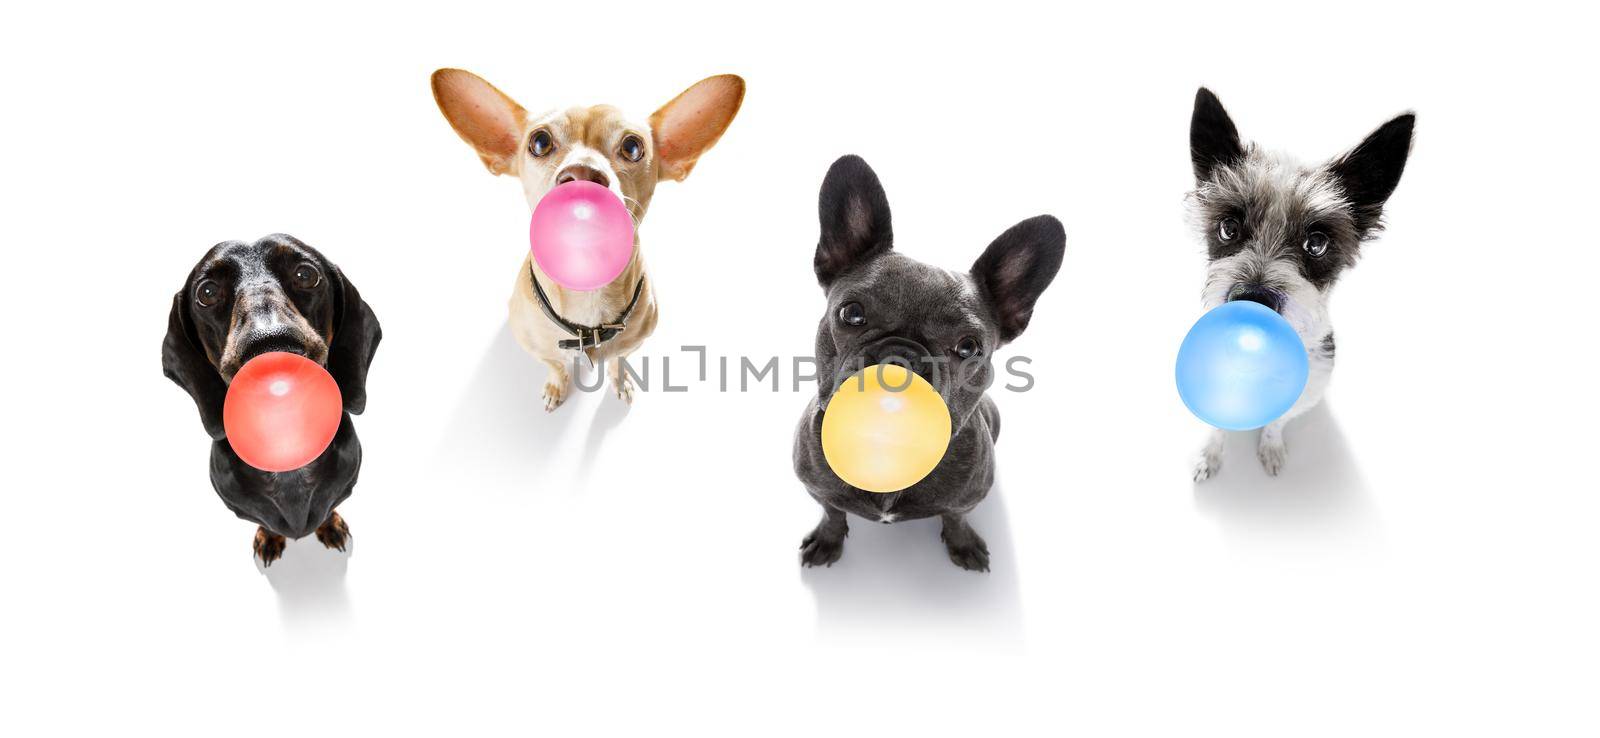 dog chewing bubble gum by Brosch